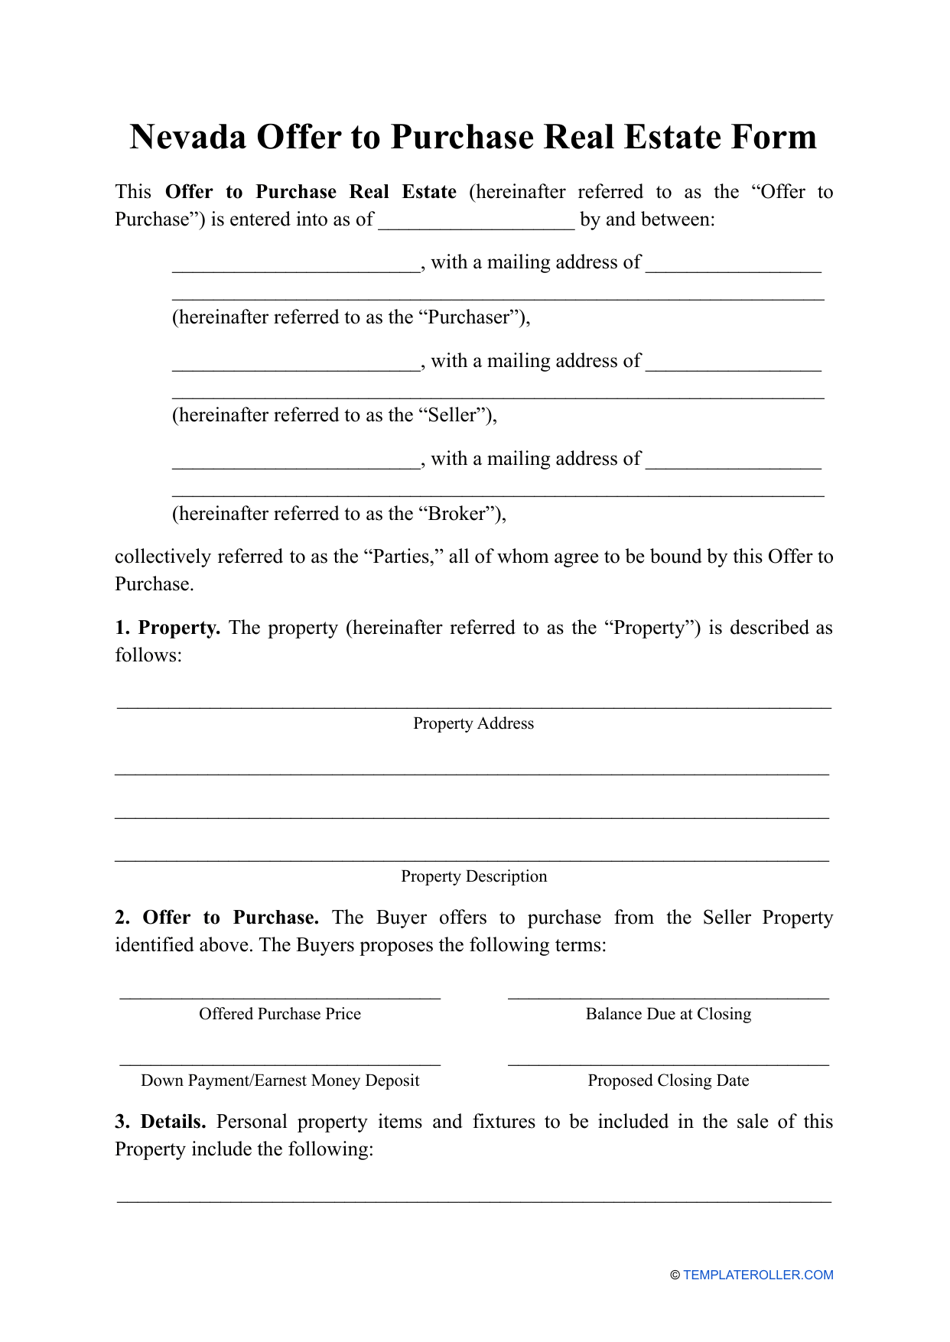 Offer to Purchase Real Estate Form - Nevada, Page 1